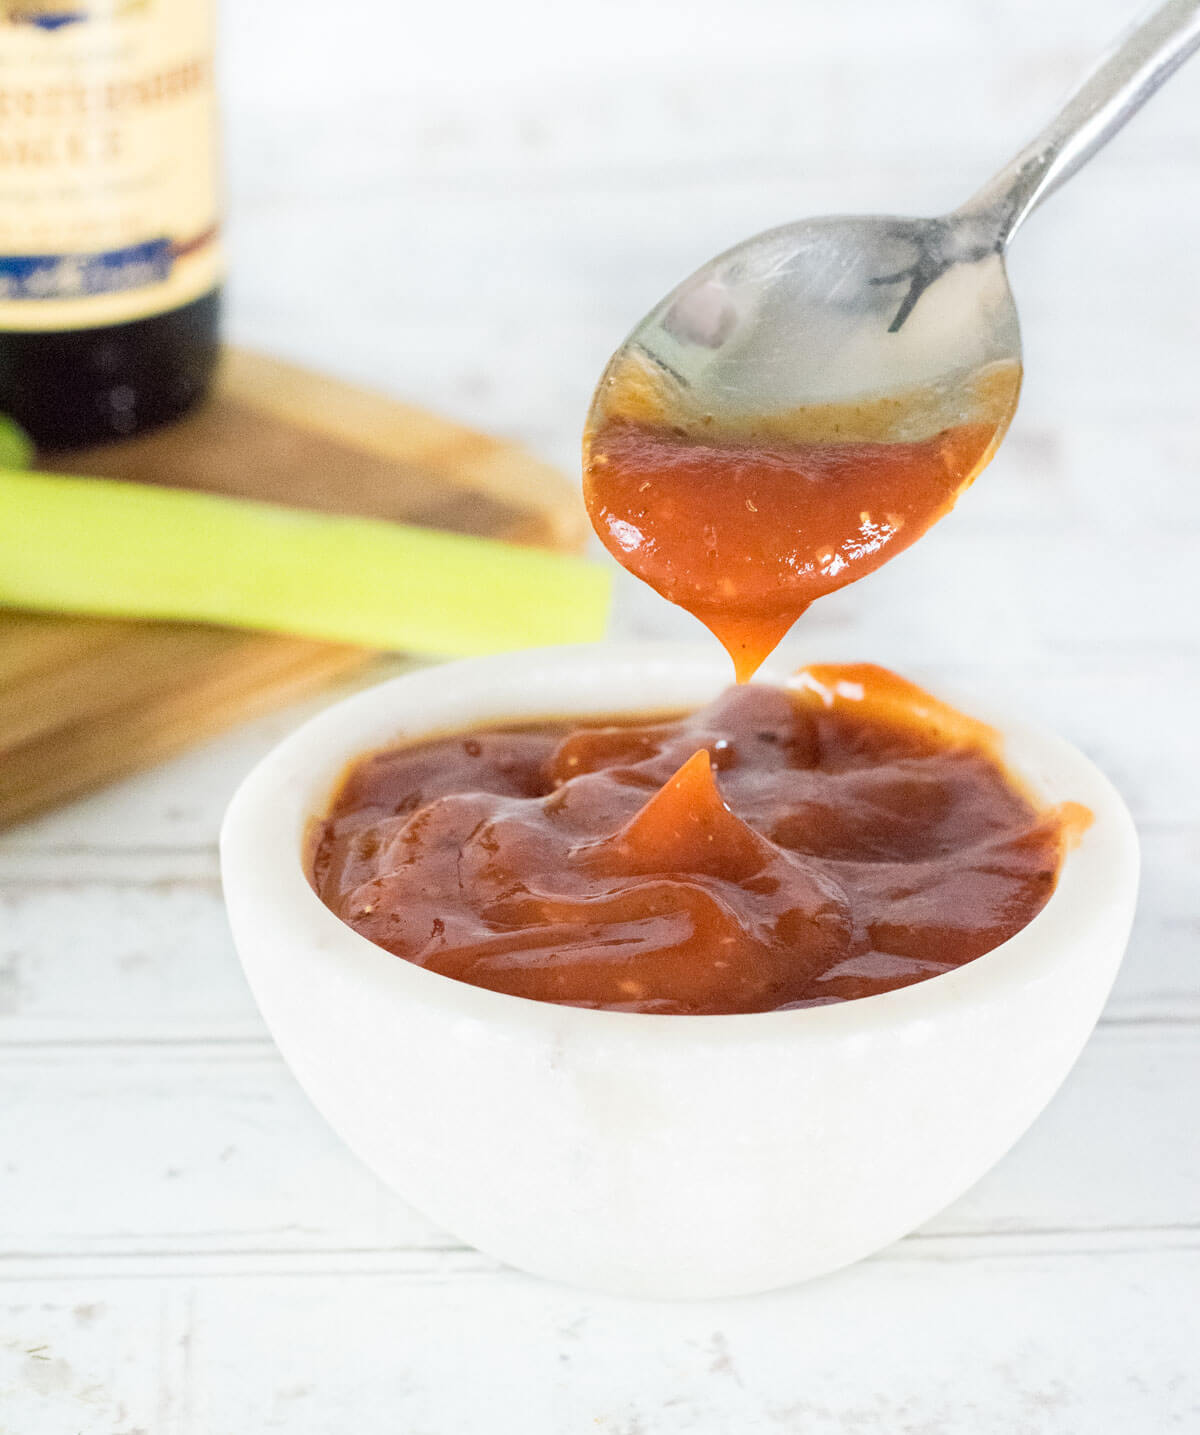 Bloody Mary ketchup dipped with spoon.